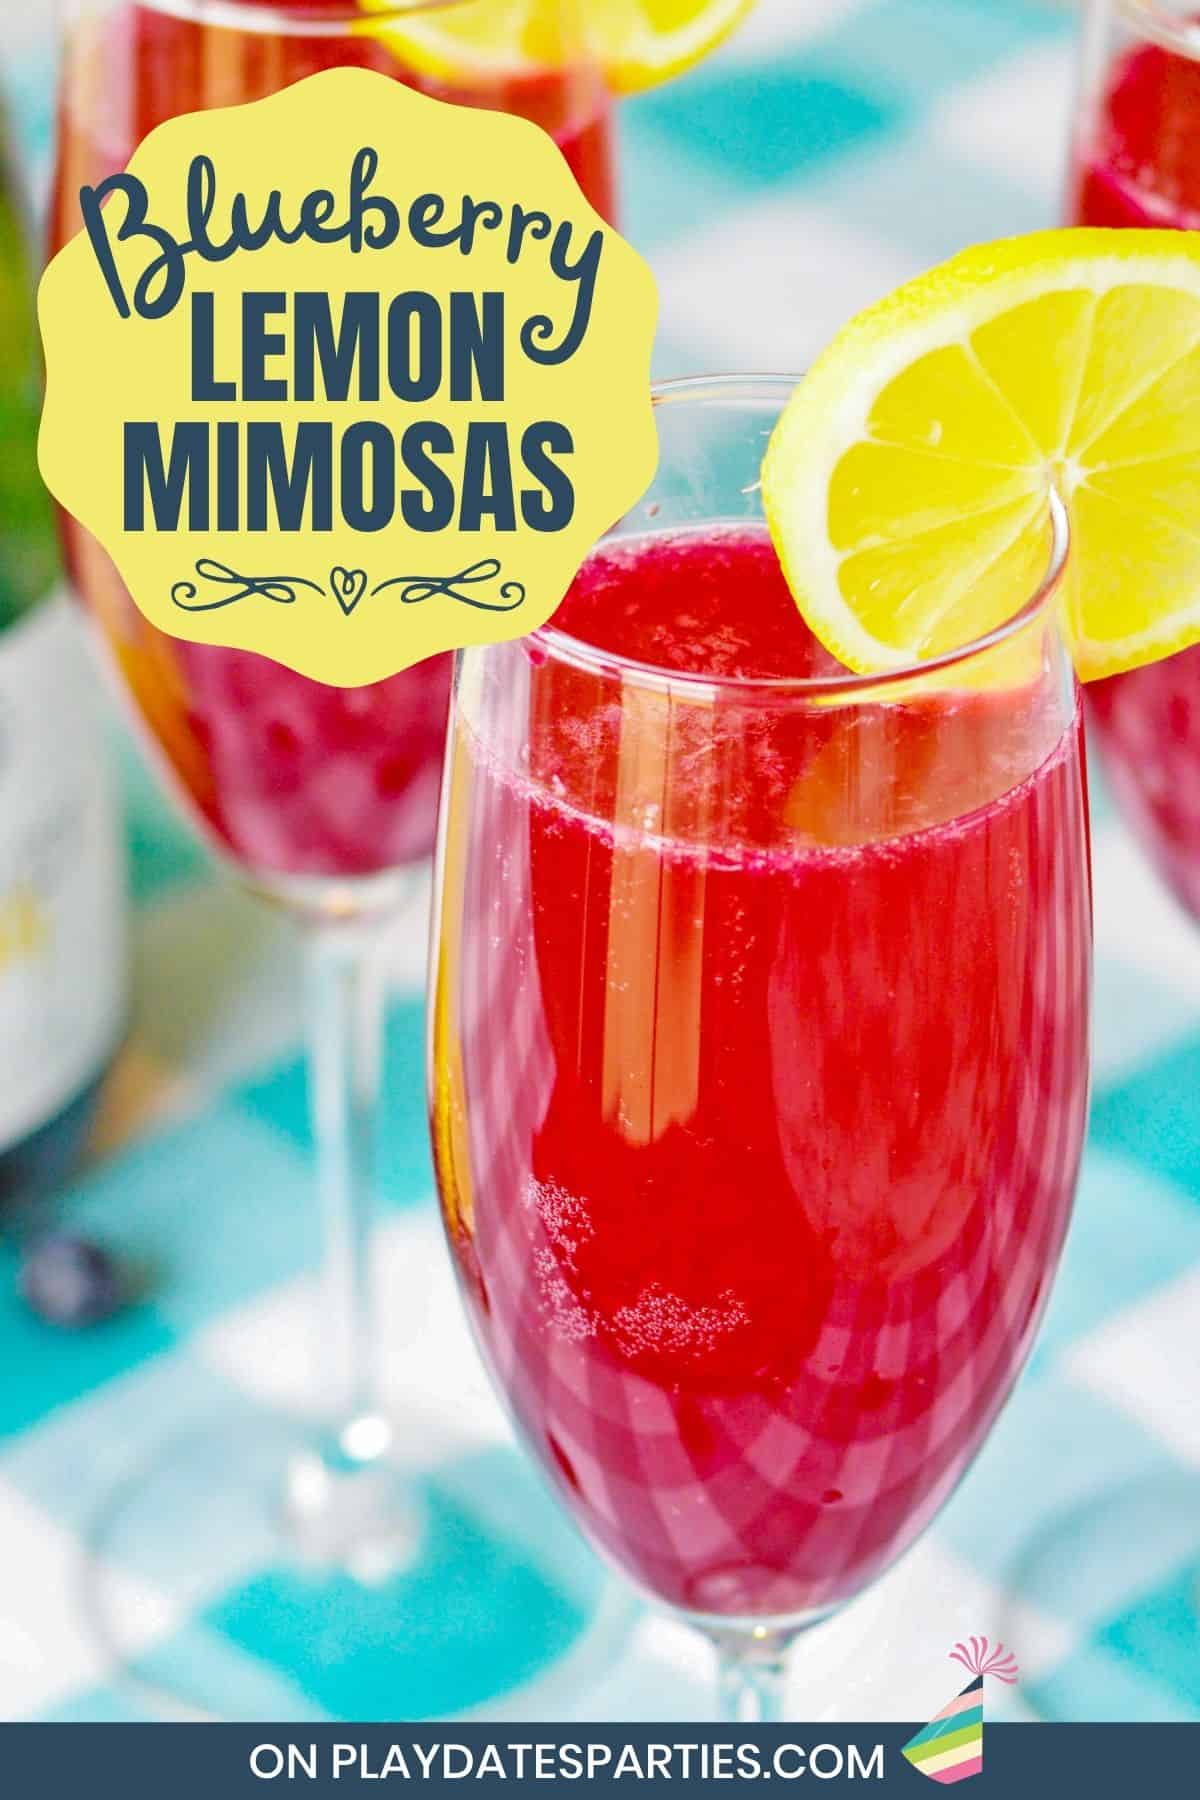 Closeup of a red mimosa with text overlay blueberry lemon mimosas.